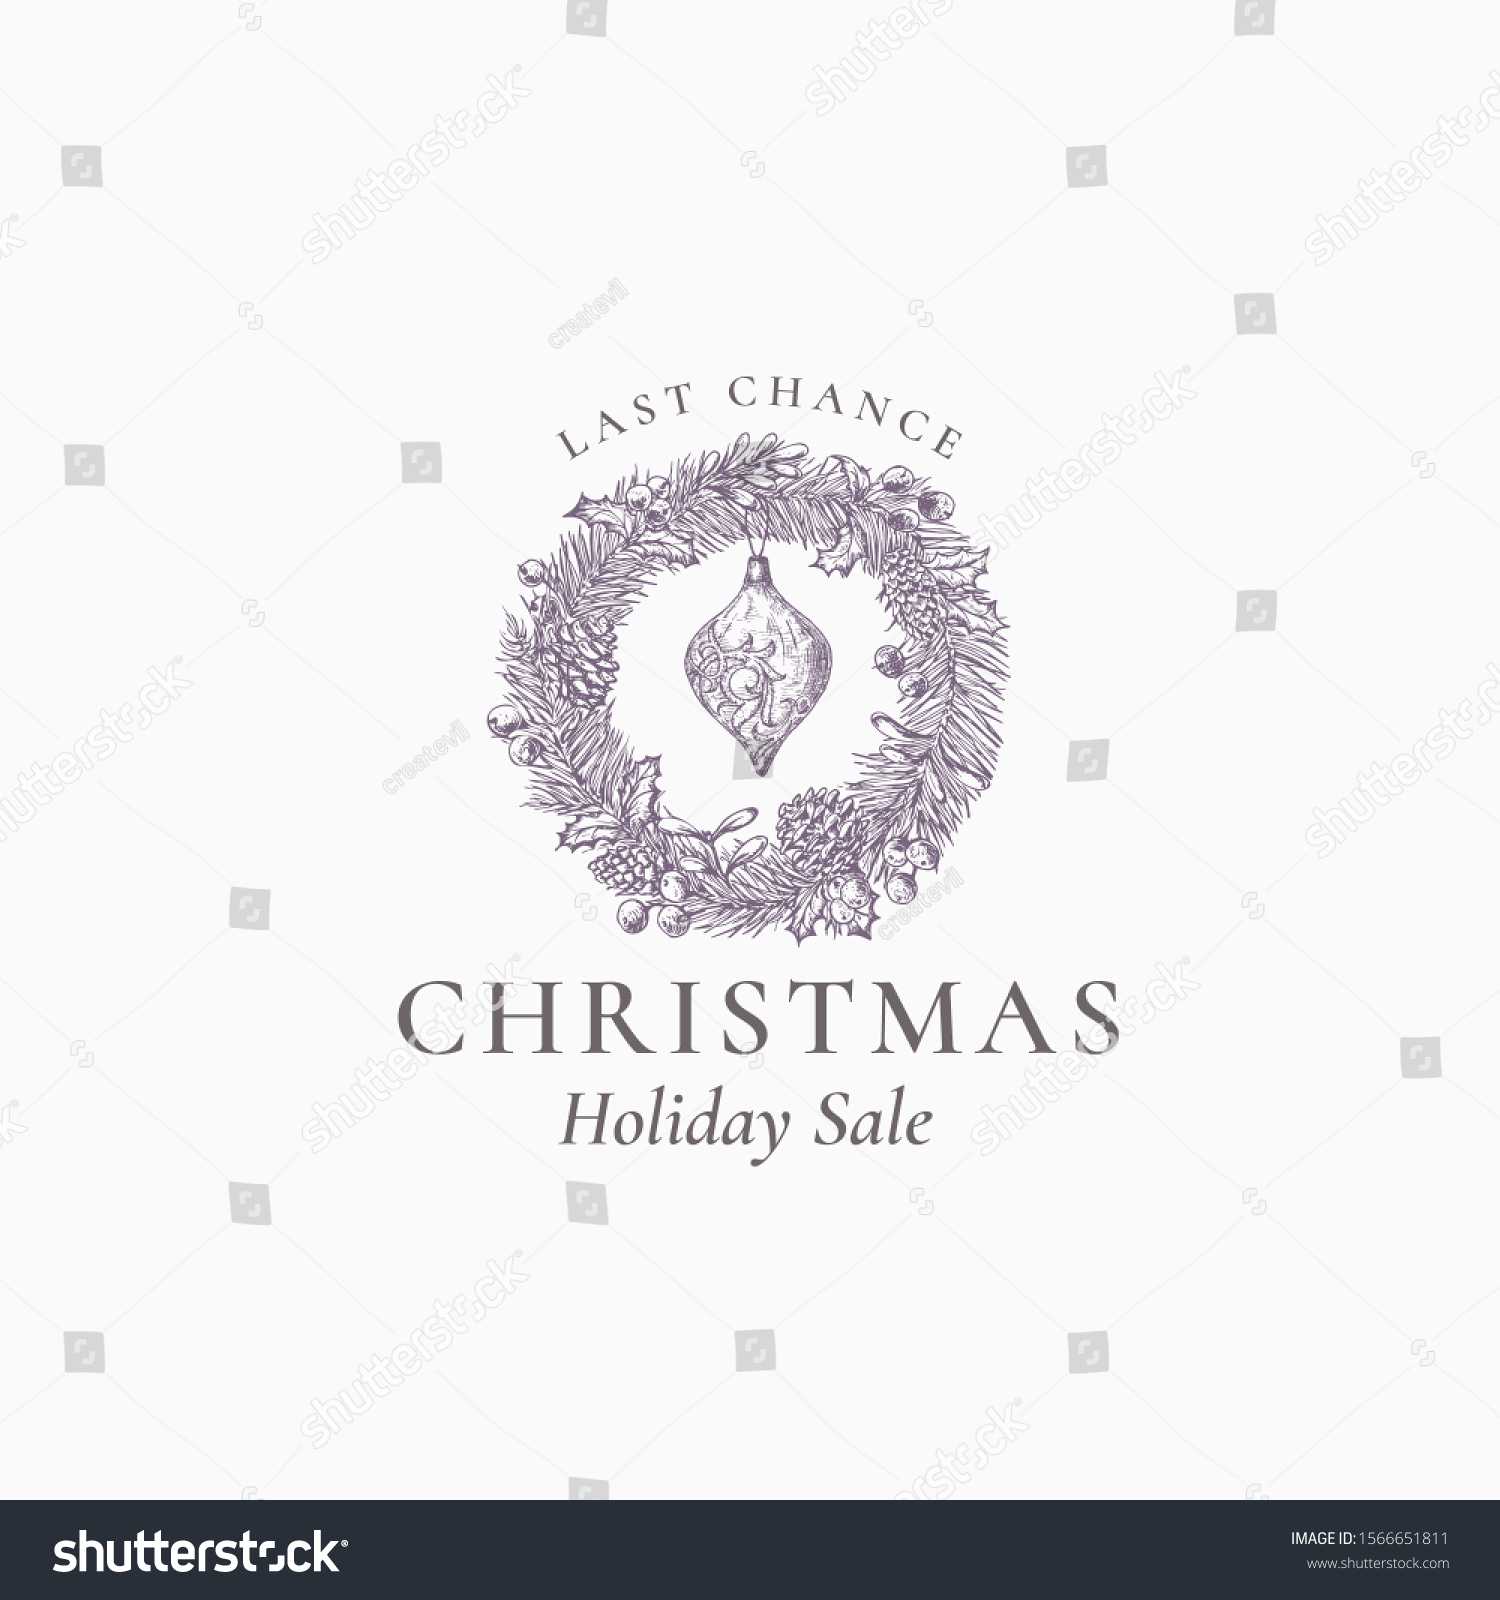 Last Chance Christmas Sale Discount Sketch Stock Vector With Chance Card Template